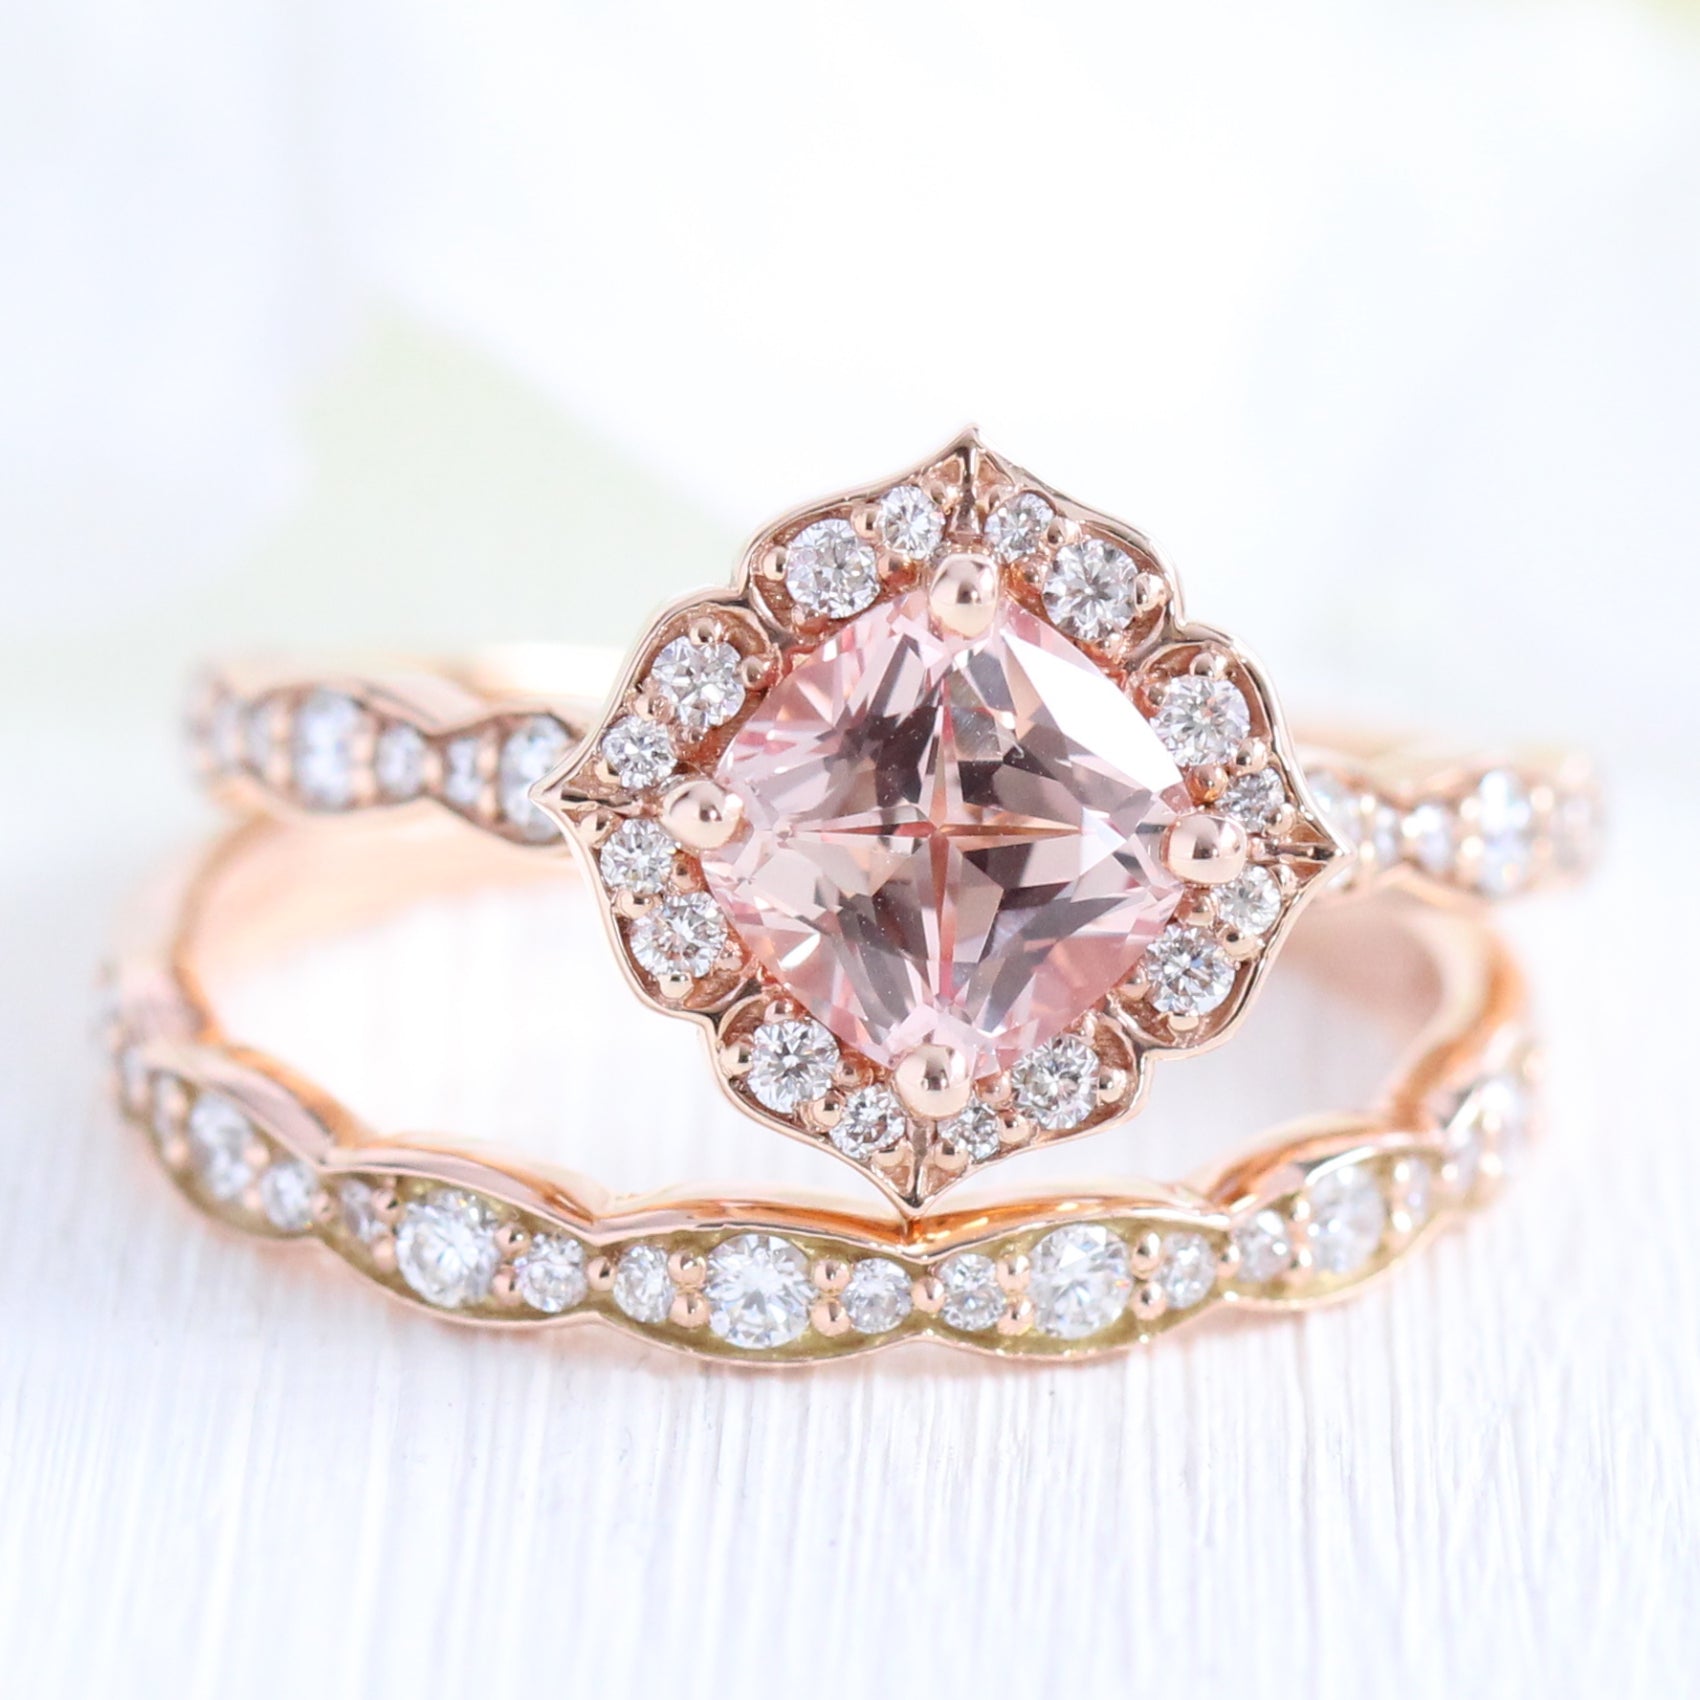 Vintage style peach sapphire diamond engagement ring rose gold bridal set by la more design jewelry